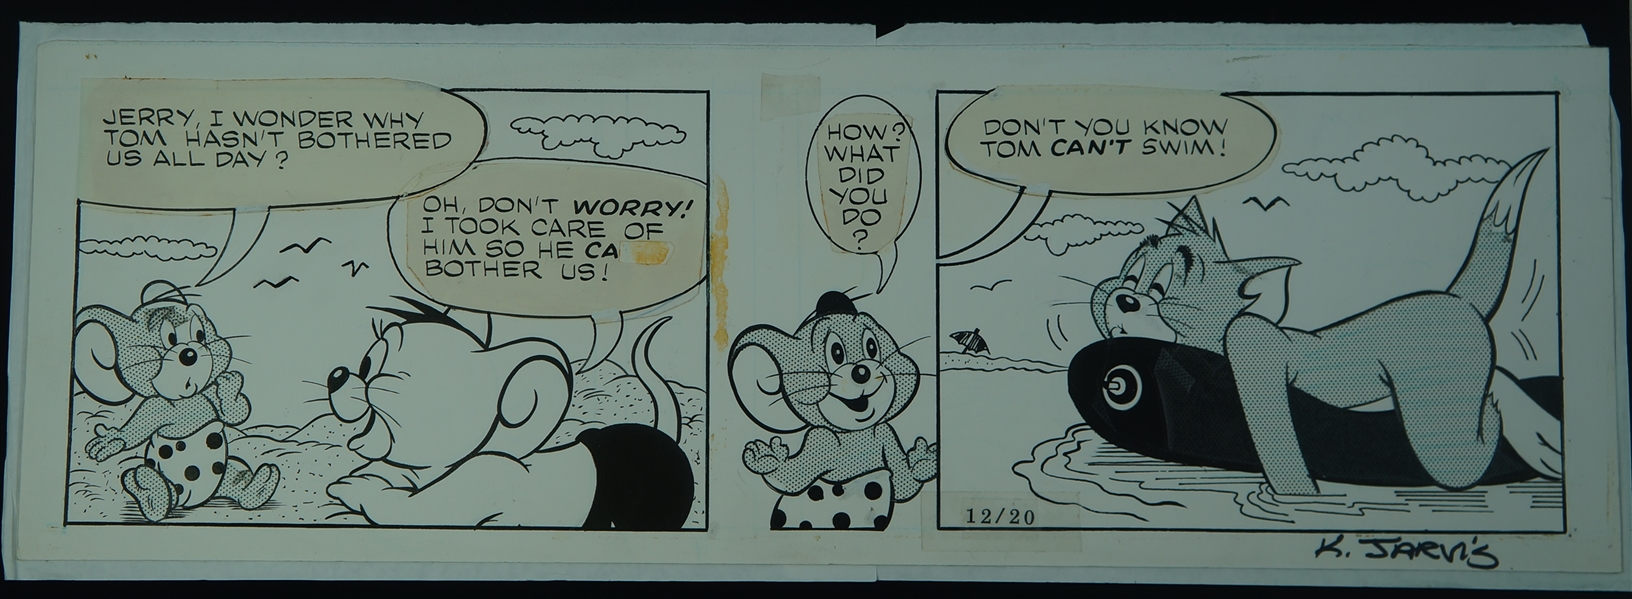 Kelly Jarvis Tom and Jerry Sunday Comic Strip Original Art Signed by Jarvis